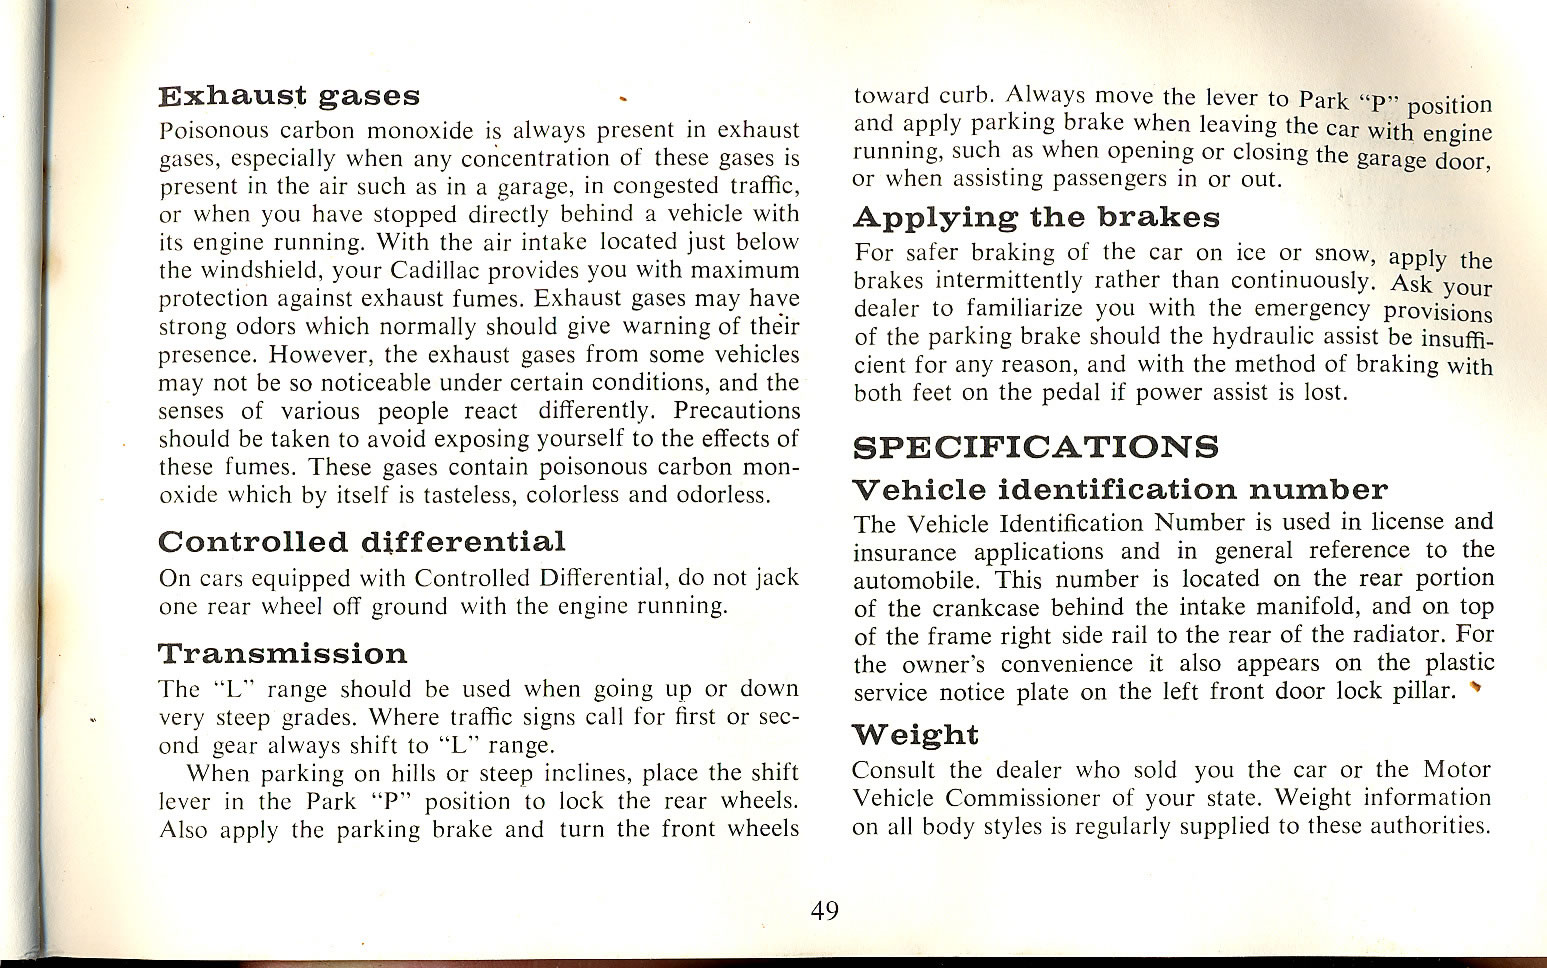 1965 Cadillac Owners Manual Page 13